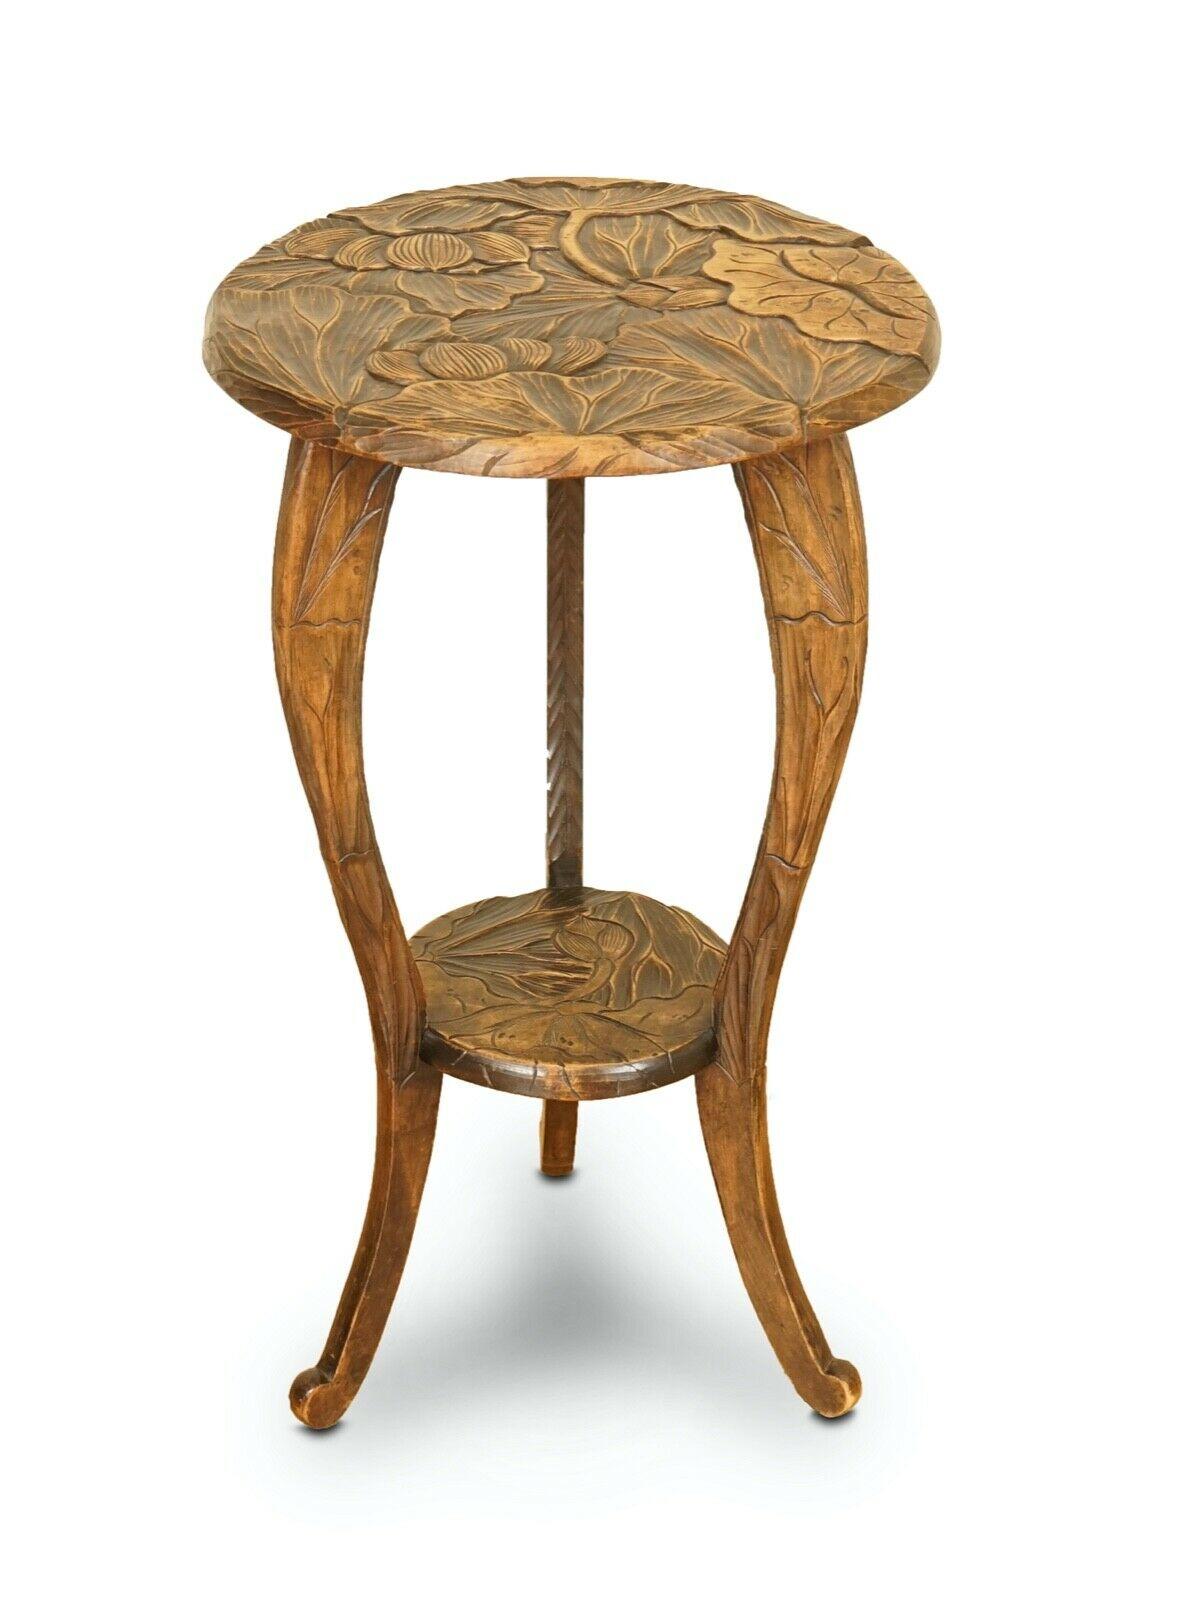 We are delighted to offer for sale this 1905's Liberty London heavily carved side table.
A very good-looking piece, it's hand-carved from top to bottom with floral detailing.
I have a similar table listed in my other items.
These pieces come in